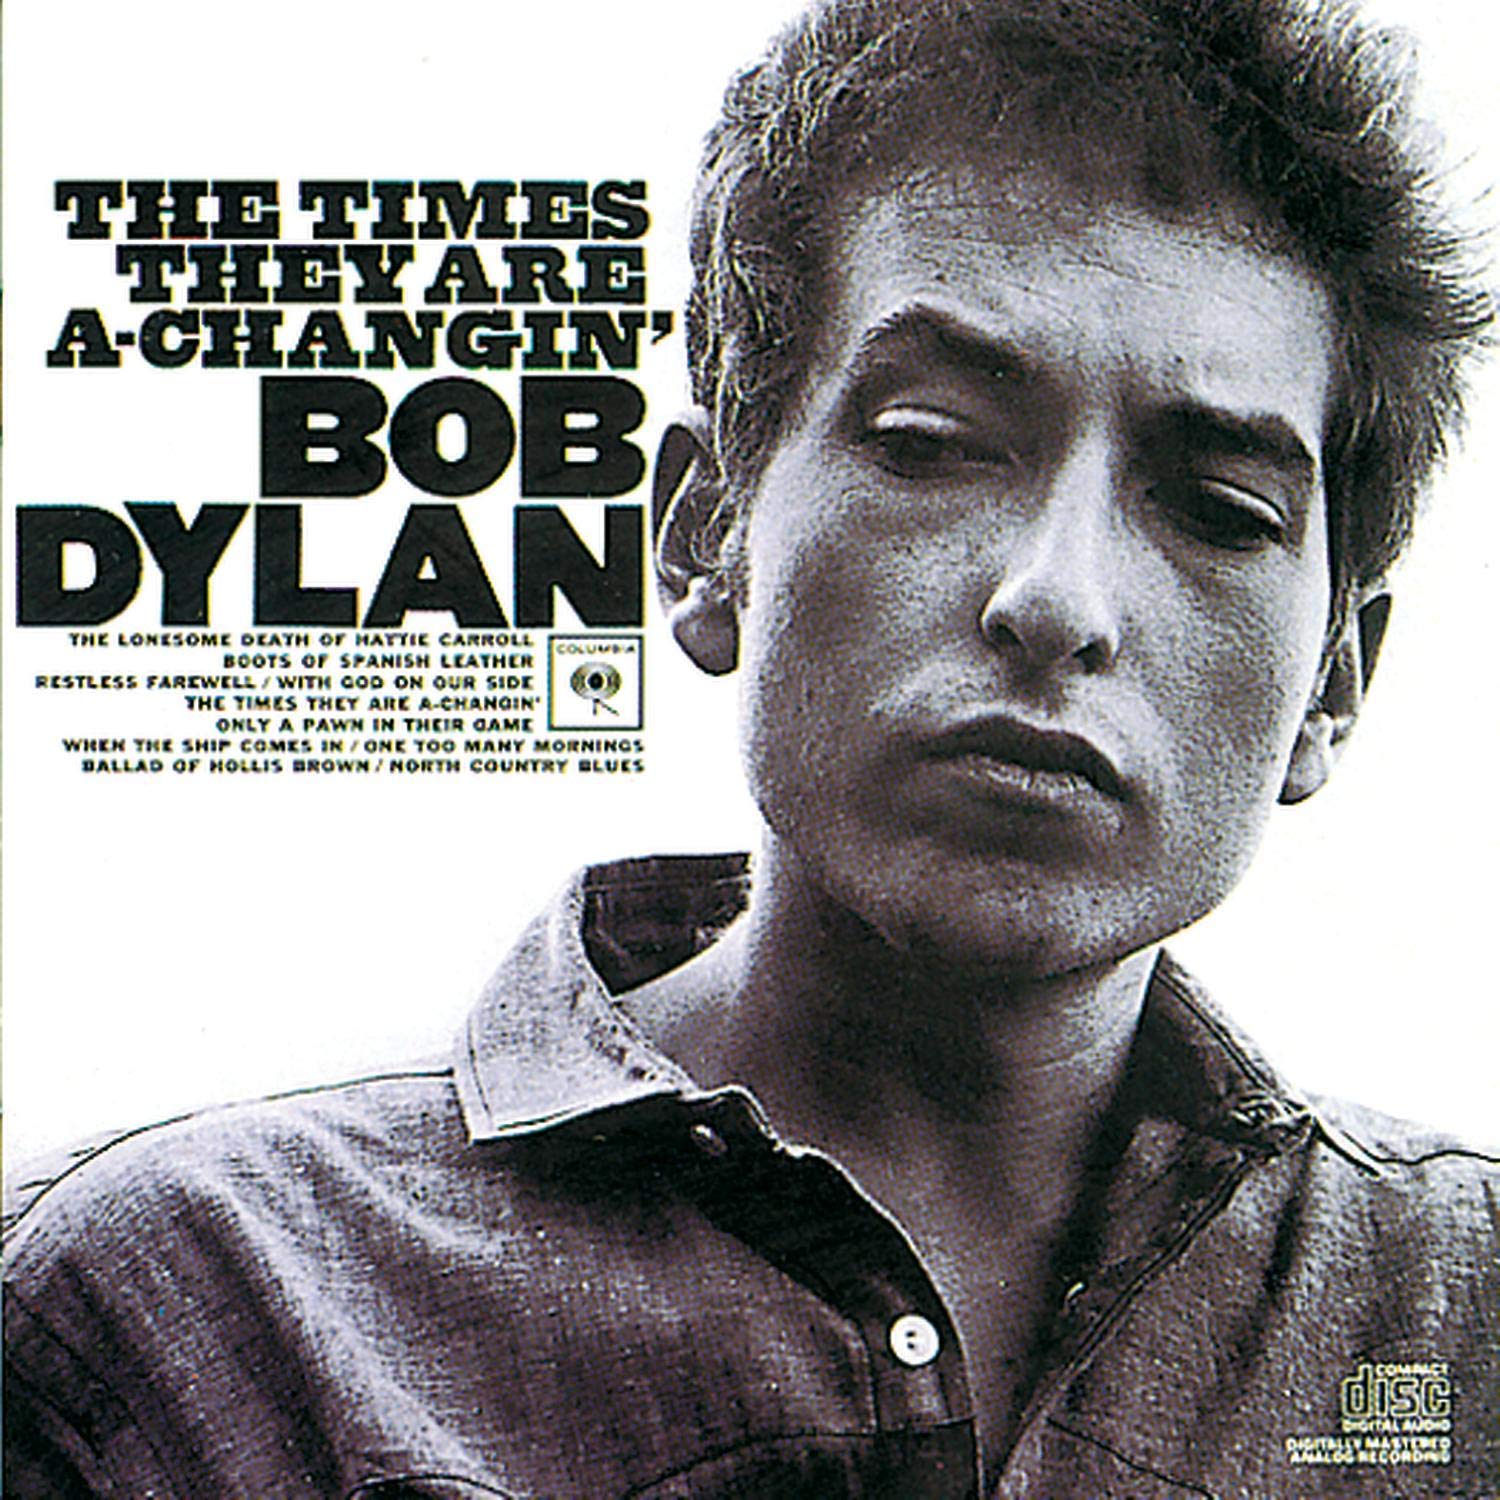 Almvbum cover for Bob Dylan's The Times They Are A-Changin'